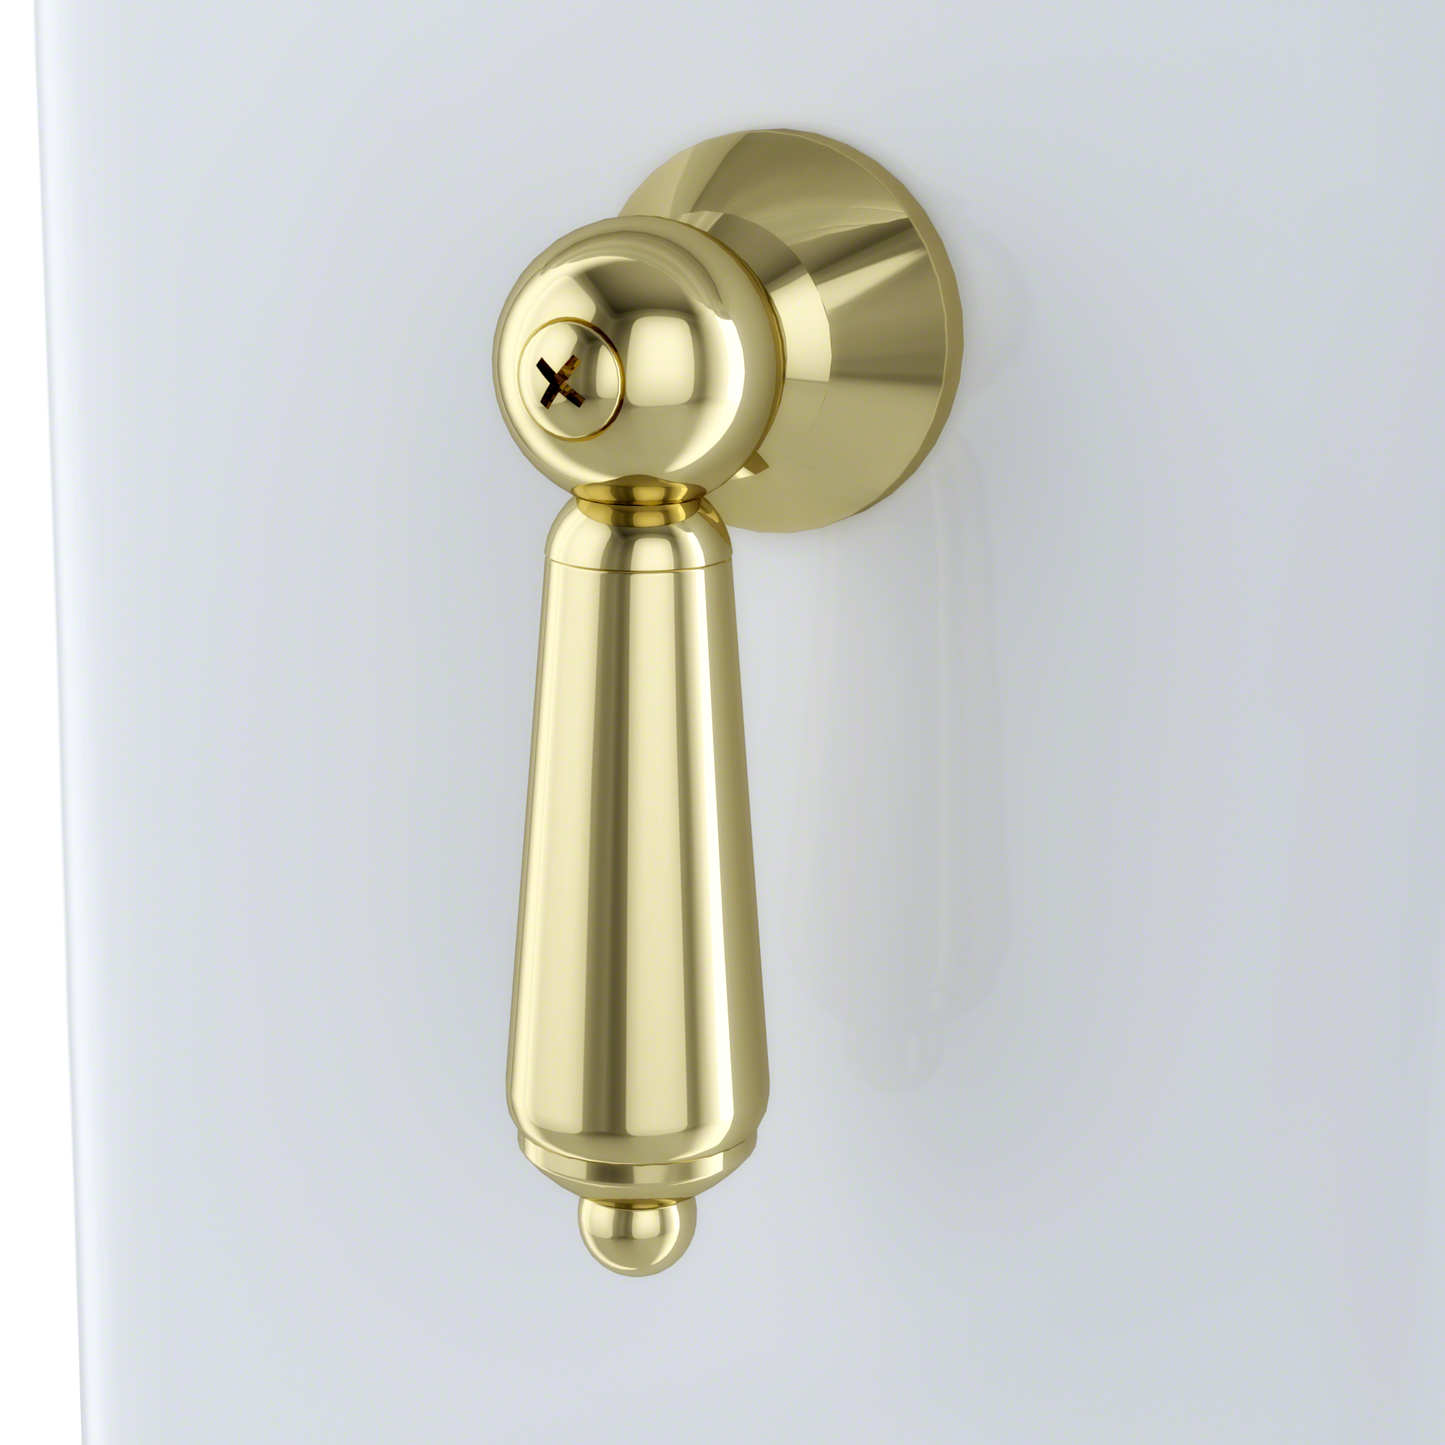 Toto THU141#PB - Trip Lever for ST774S Toilet Tank- Polished Brass